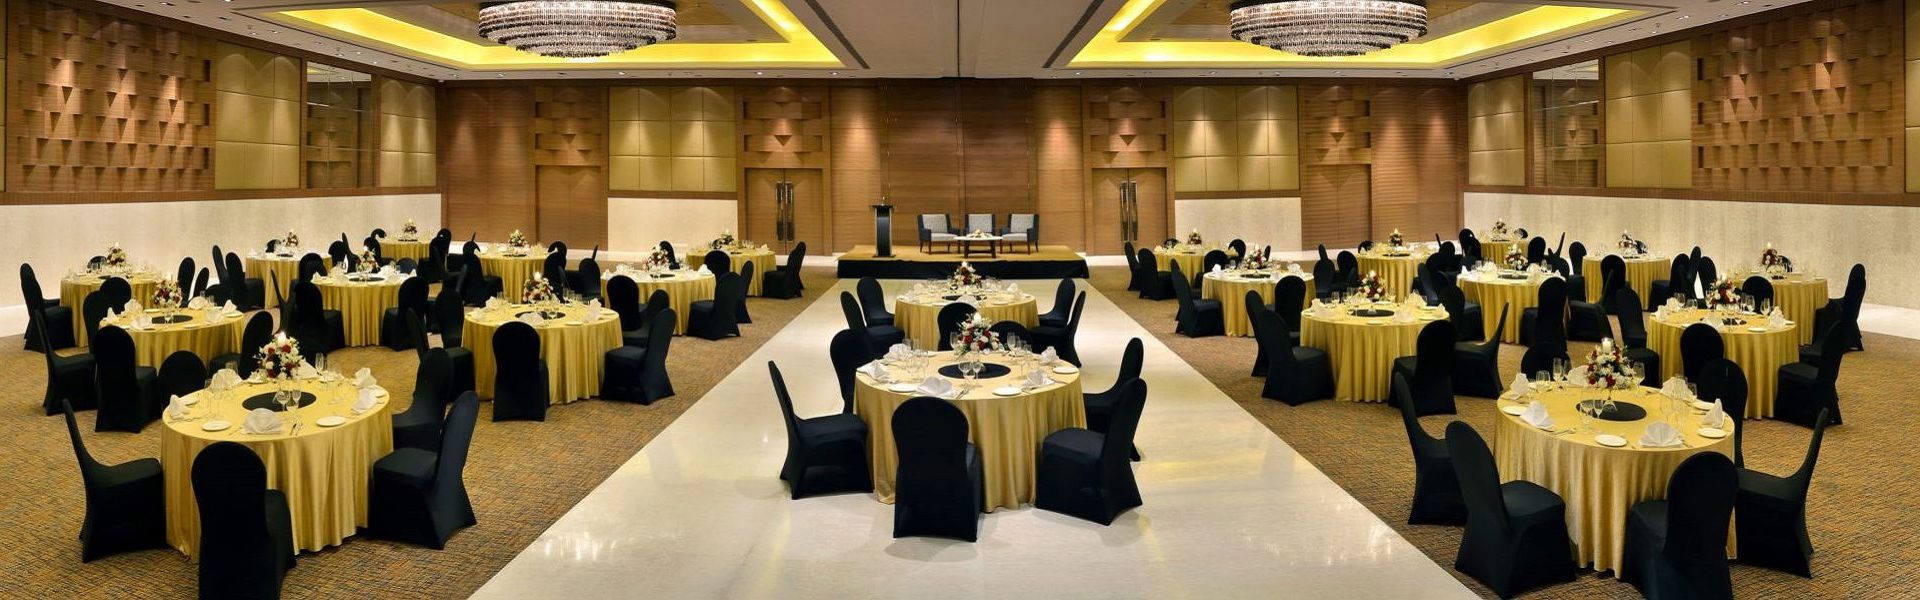 Business Hotels In Chandigarh, Event & Conference Venues in Chandigarh